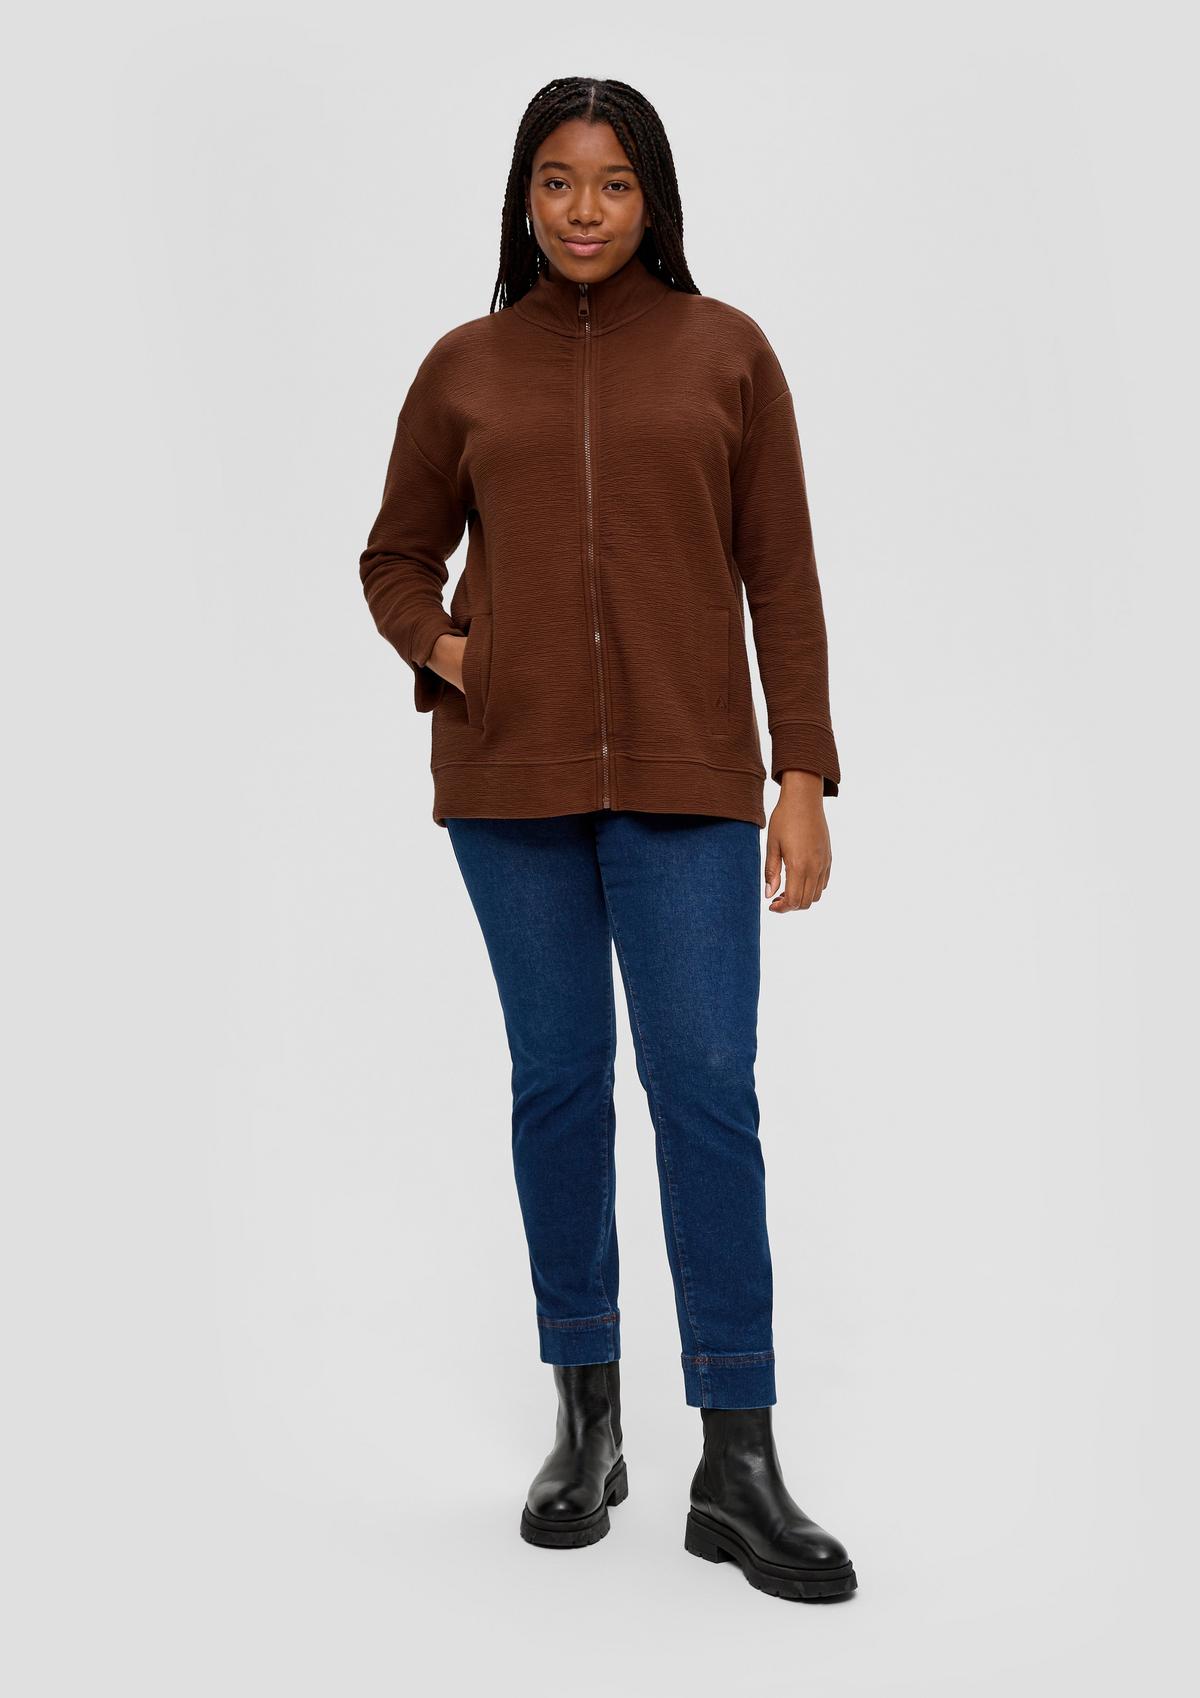 s.Oliver Jersey jacket with a crinkled texture